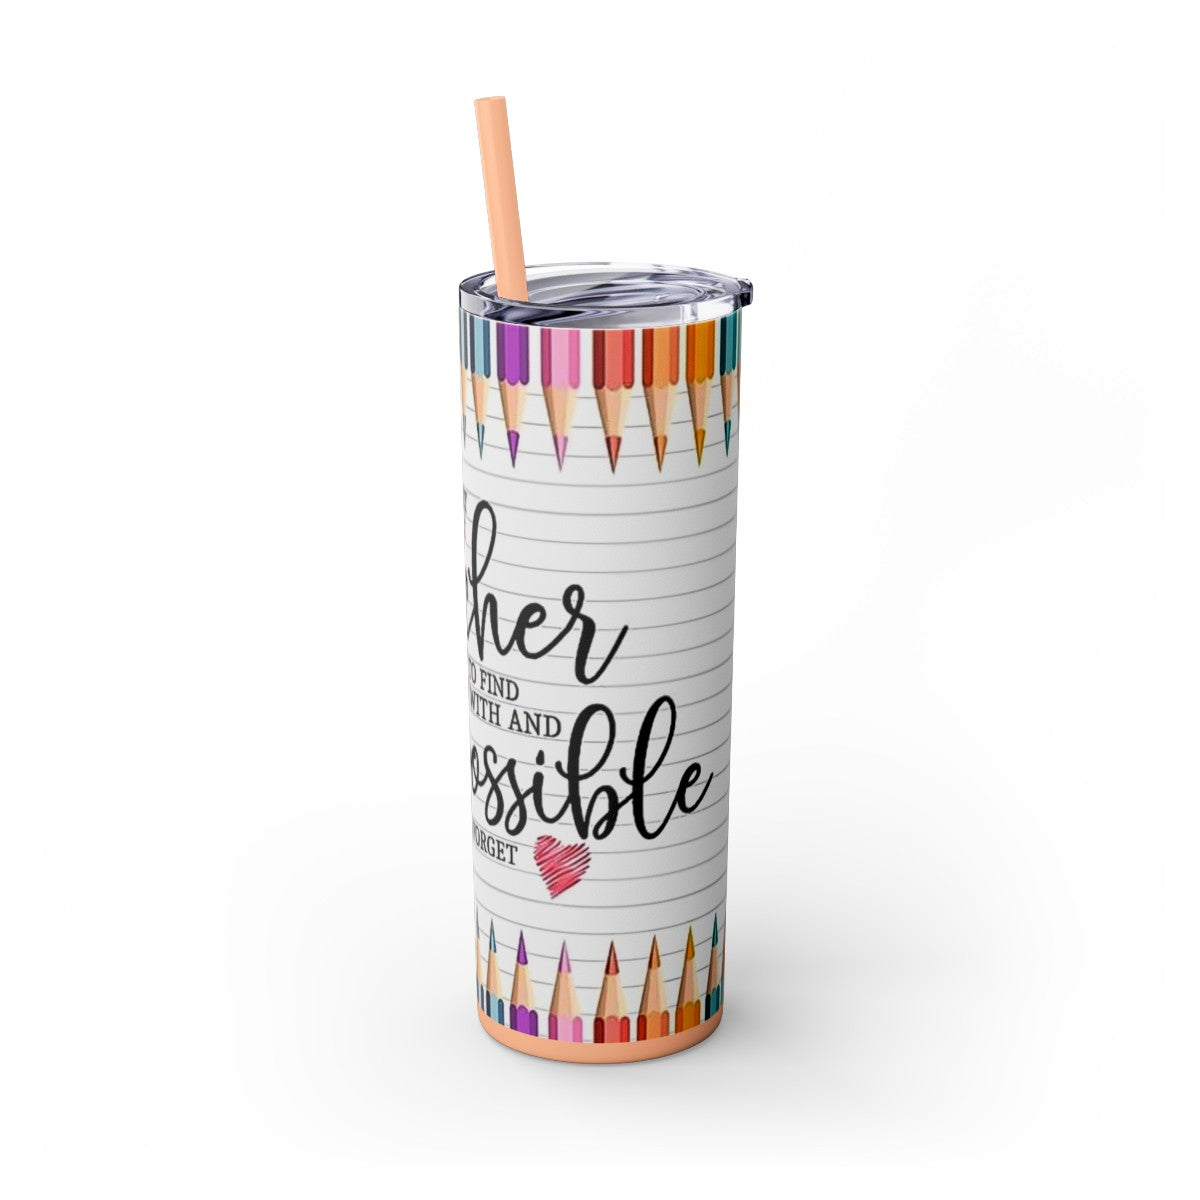 Get trendy with A Truly Great Teacher Skinny Tumbler with Straw, 20oz -  available at Good Gift Company. Grab yours for $24.99 today!